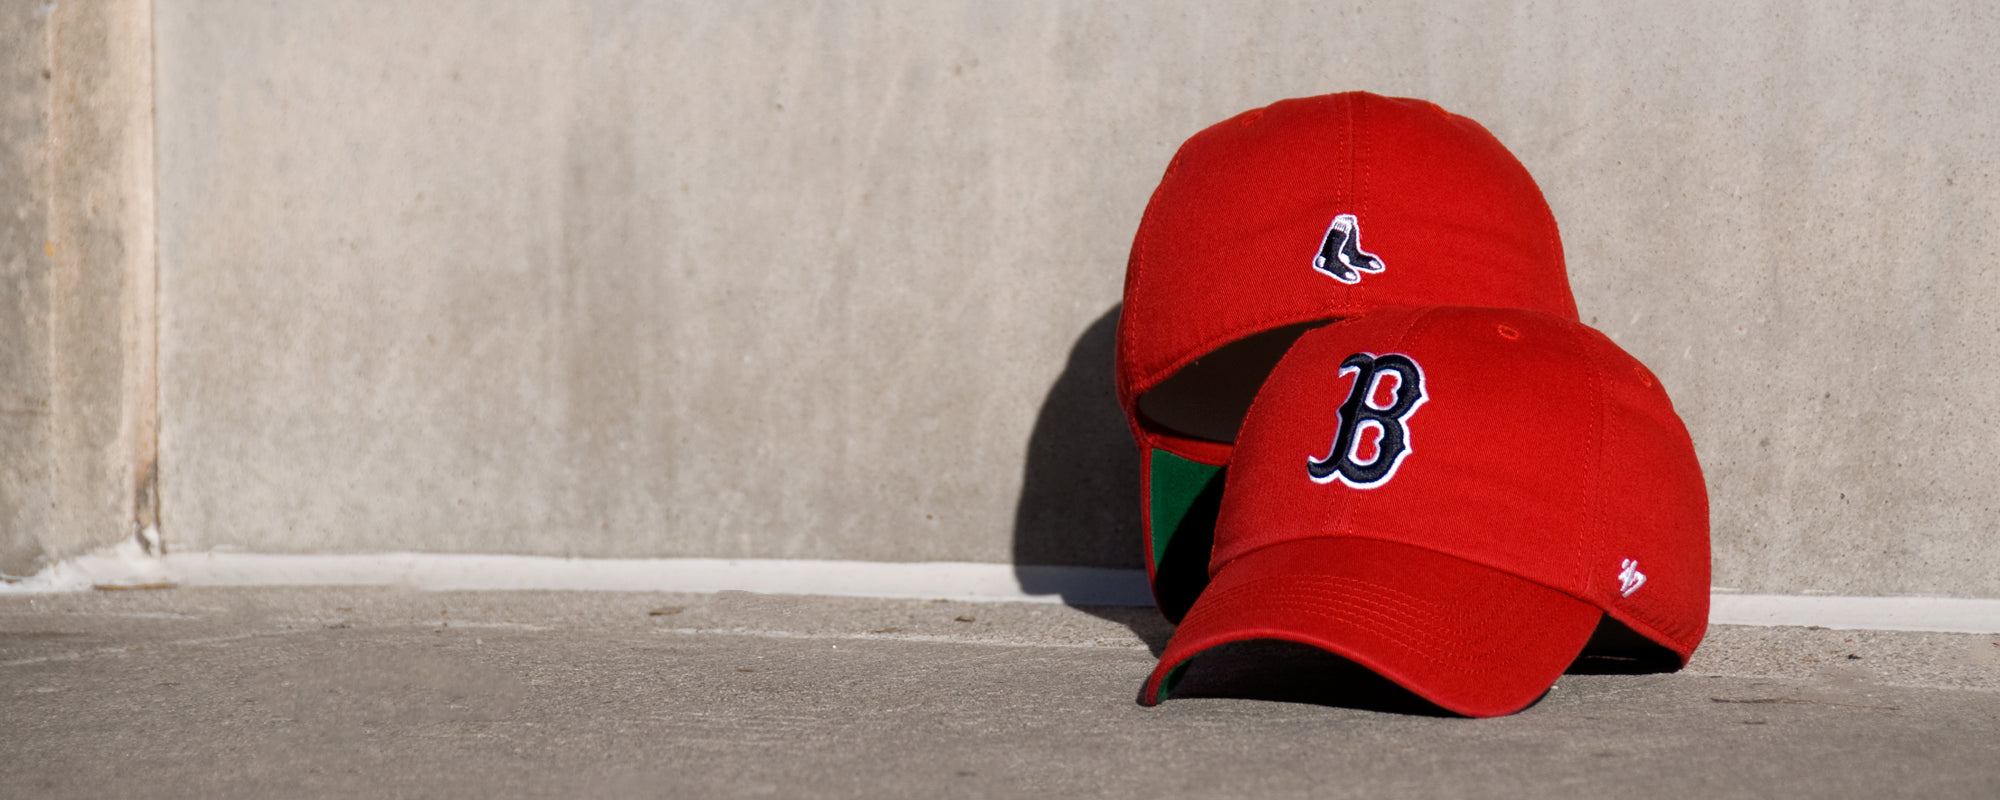 Boston Red Sox City Connect Jerseys, Hats and More